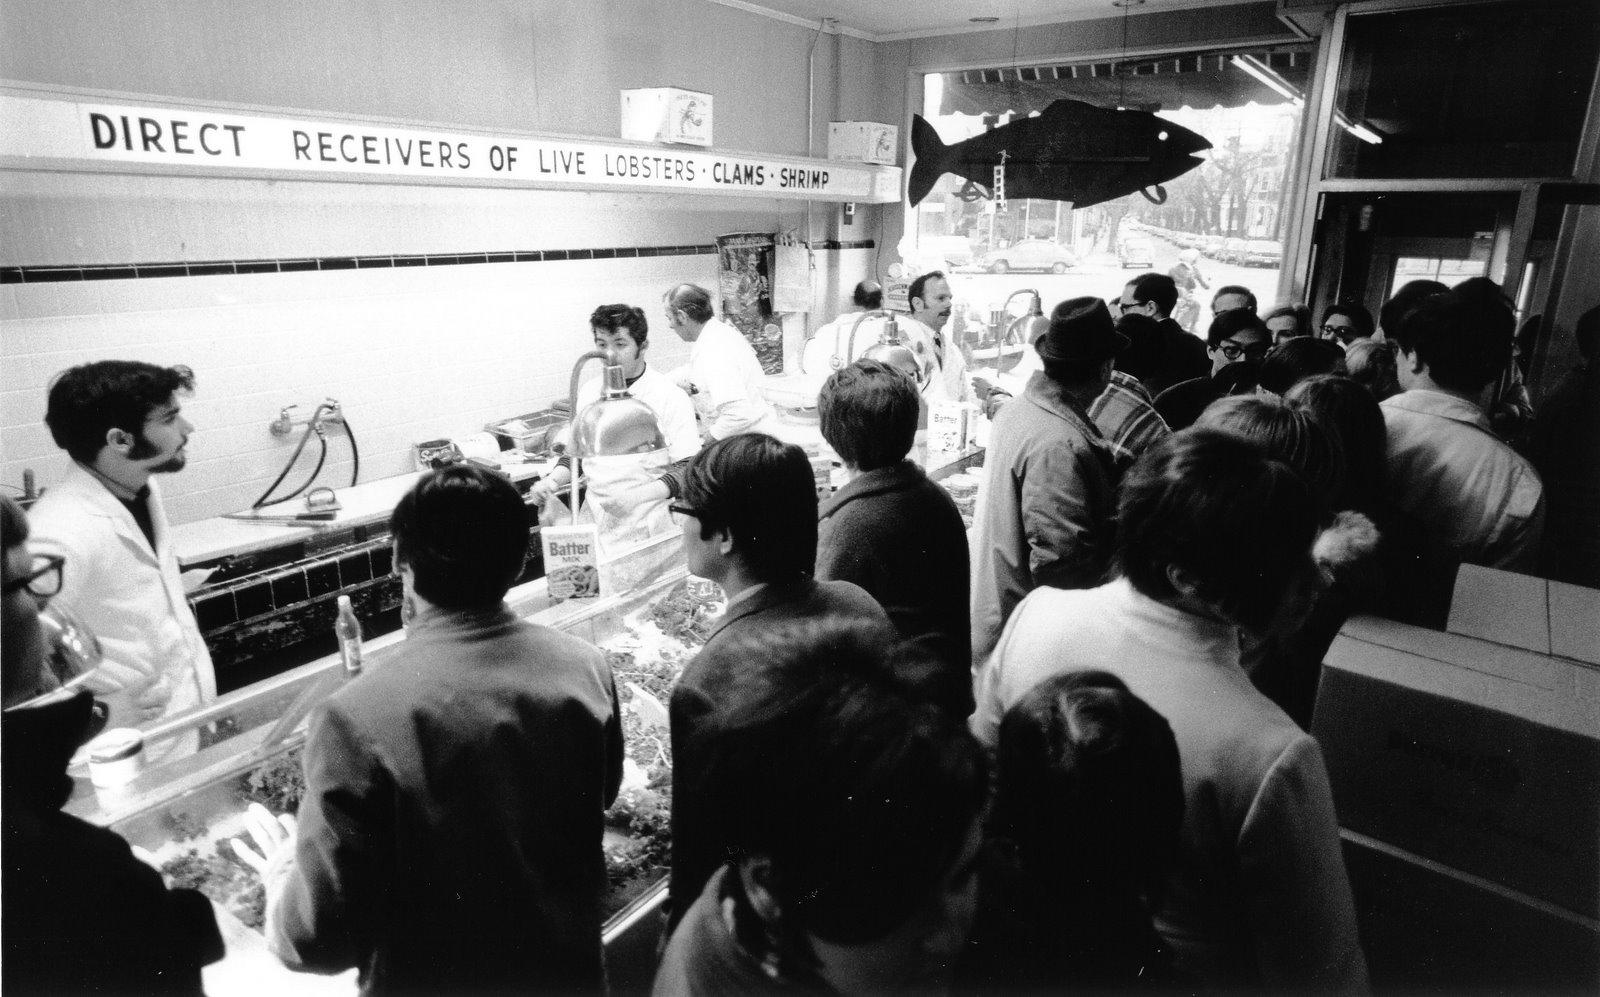 Small room filled with many people. People behind a counter are wearing white coats. Man at left has dark hair, light skin, and long sideburns. A cut out fish hangs from the ceiling.